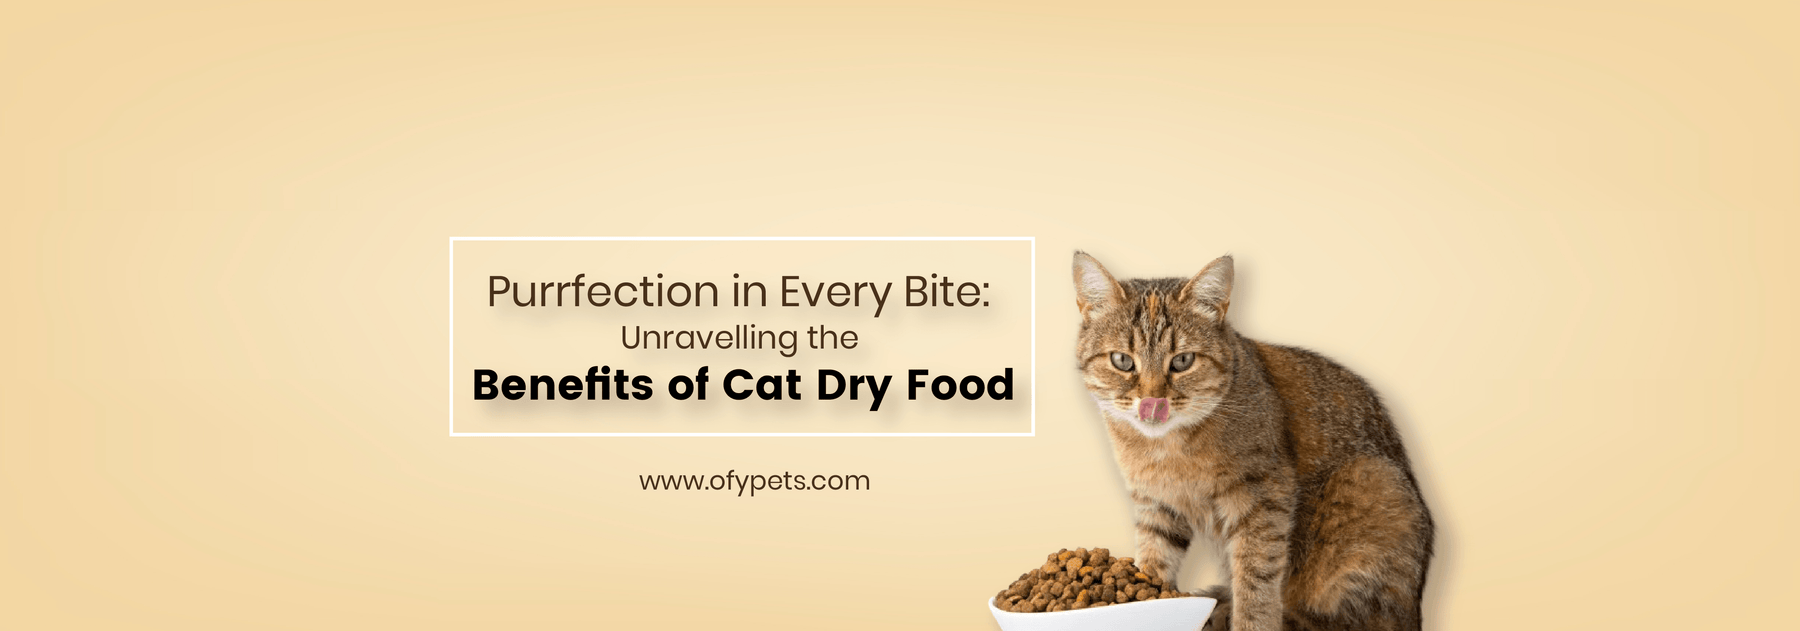 Purrfection in Every Bite: Unravelling the Benefits of Cat Dry Food - Ofypets